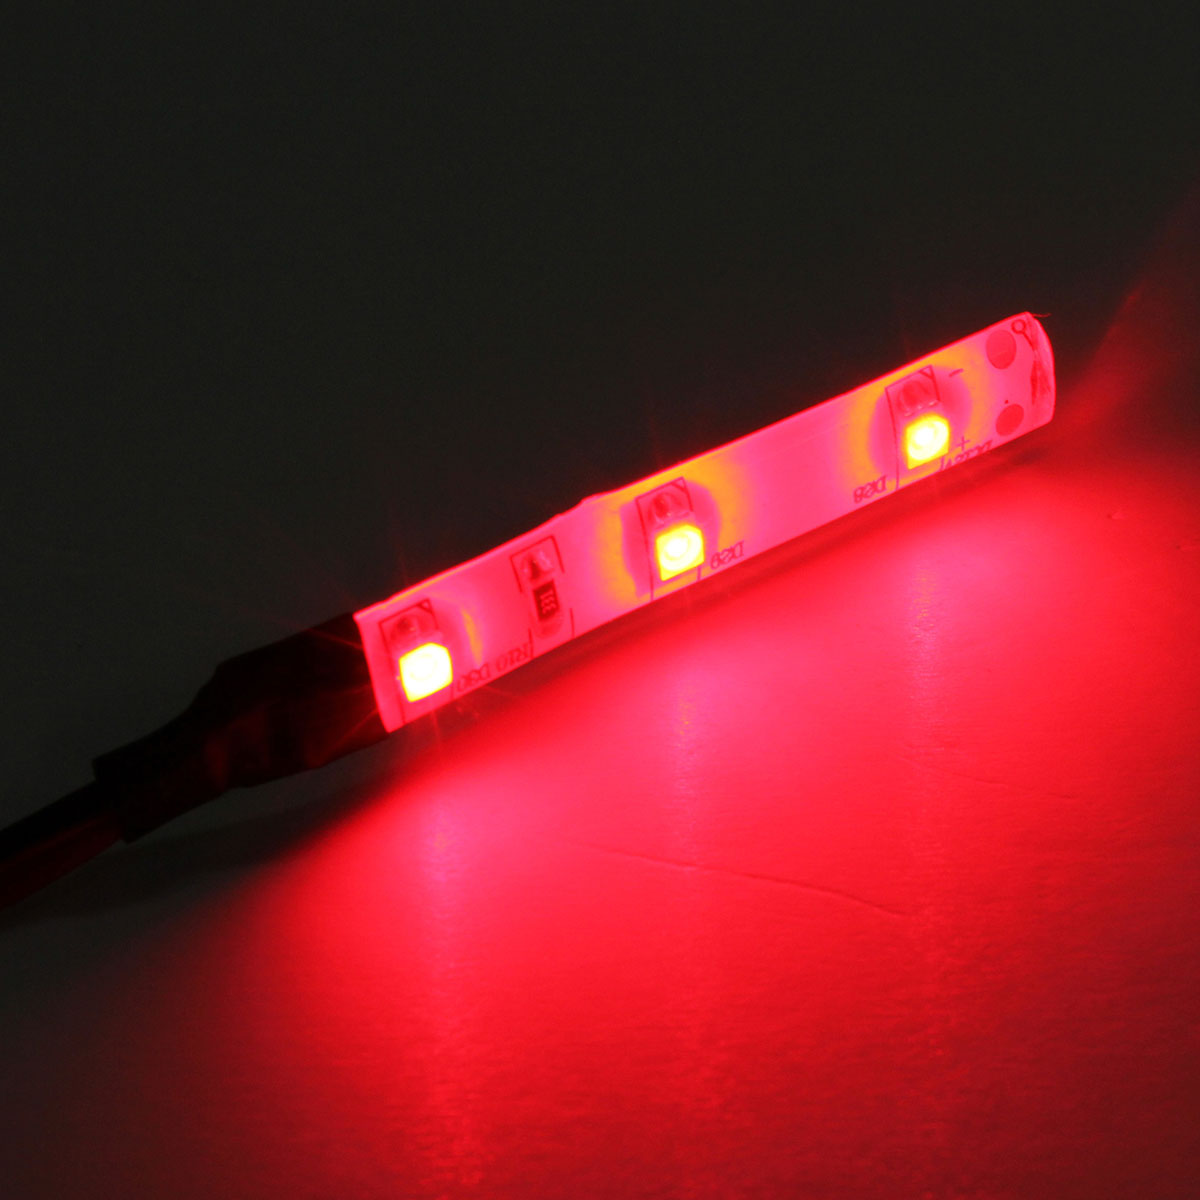 Tomato 12V 3 LED Strip Light 3528 SMD Flexible IP65 Waterproof For Motorcycle Car